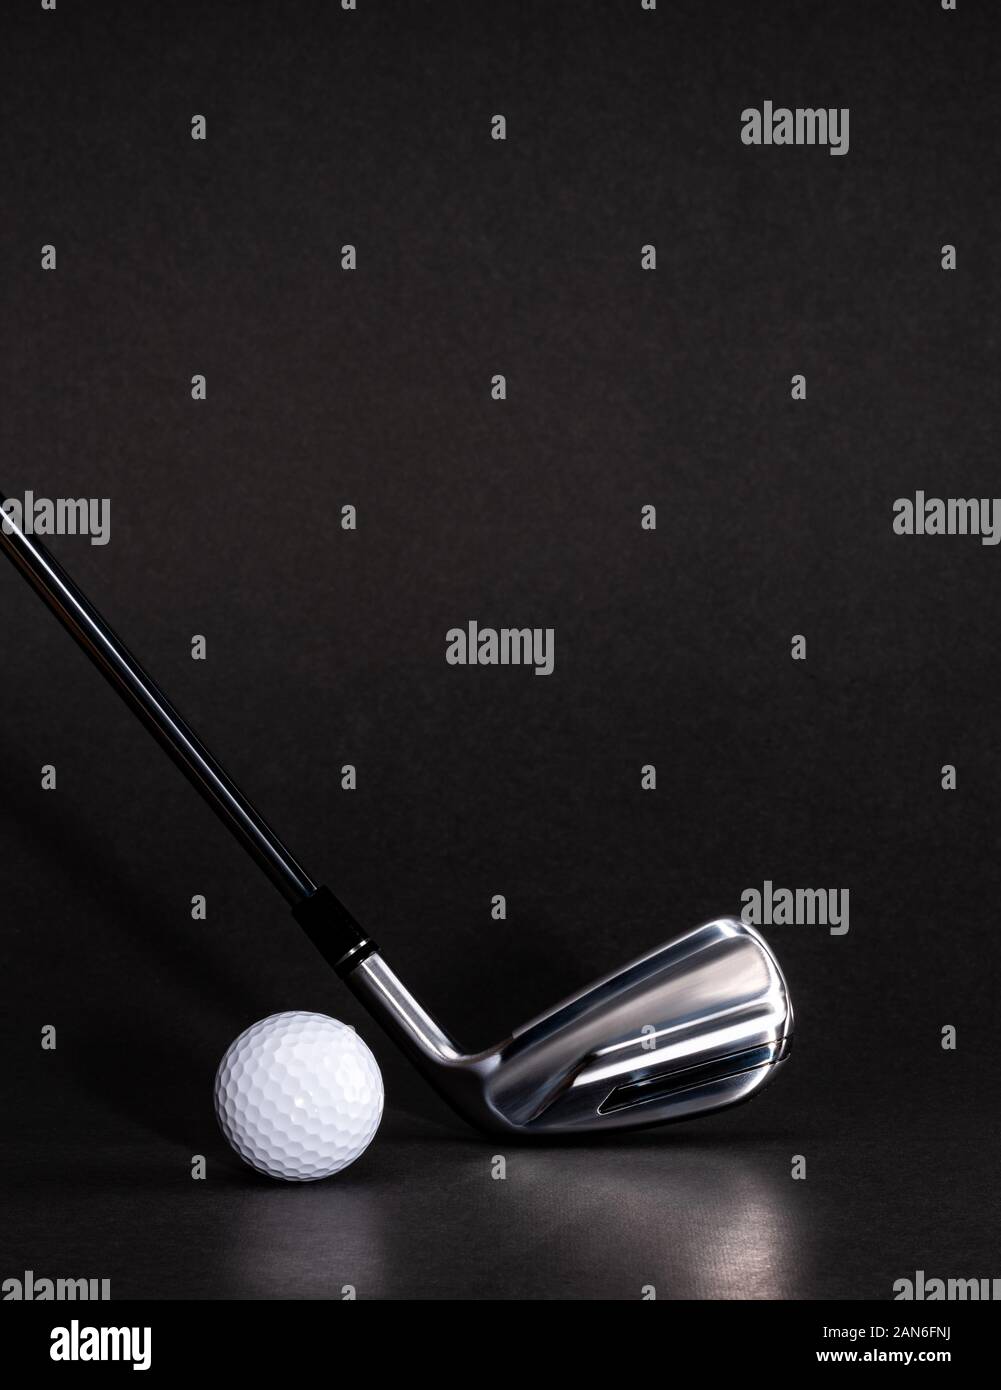 Golf clubs with ball, black background. Vertical composition Stock Photo